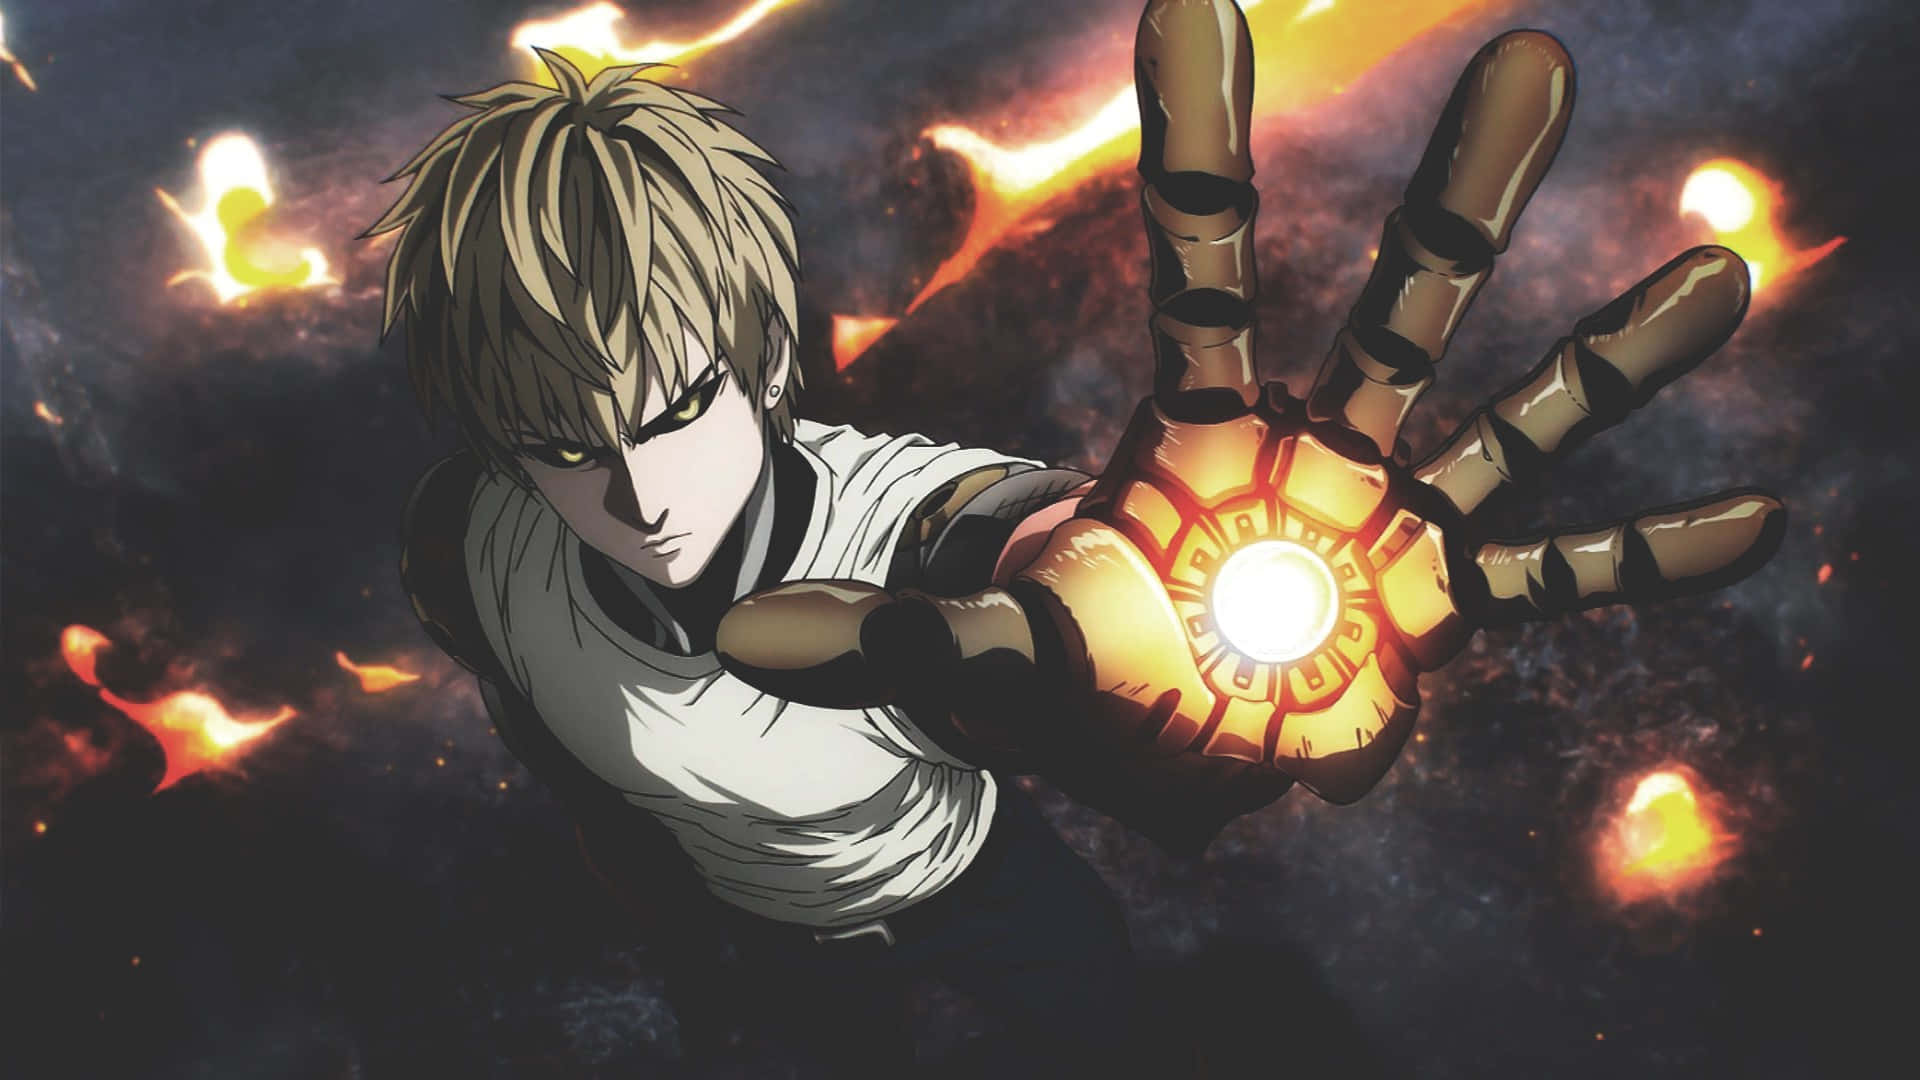 Genos from One Punch Man in an action-packed pose Wallpaper